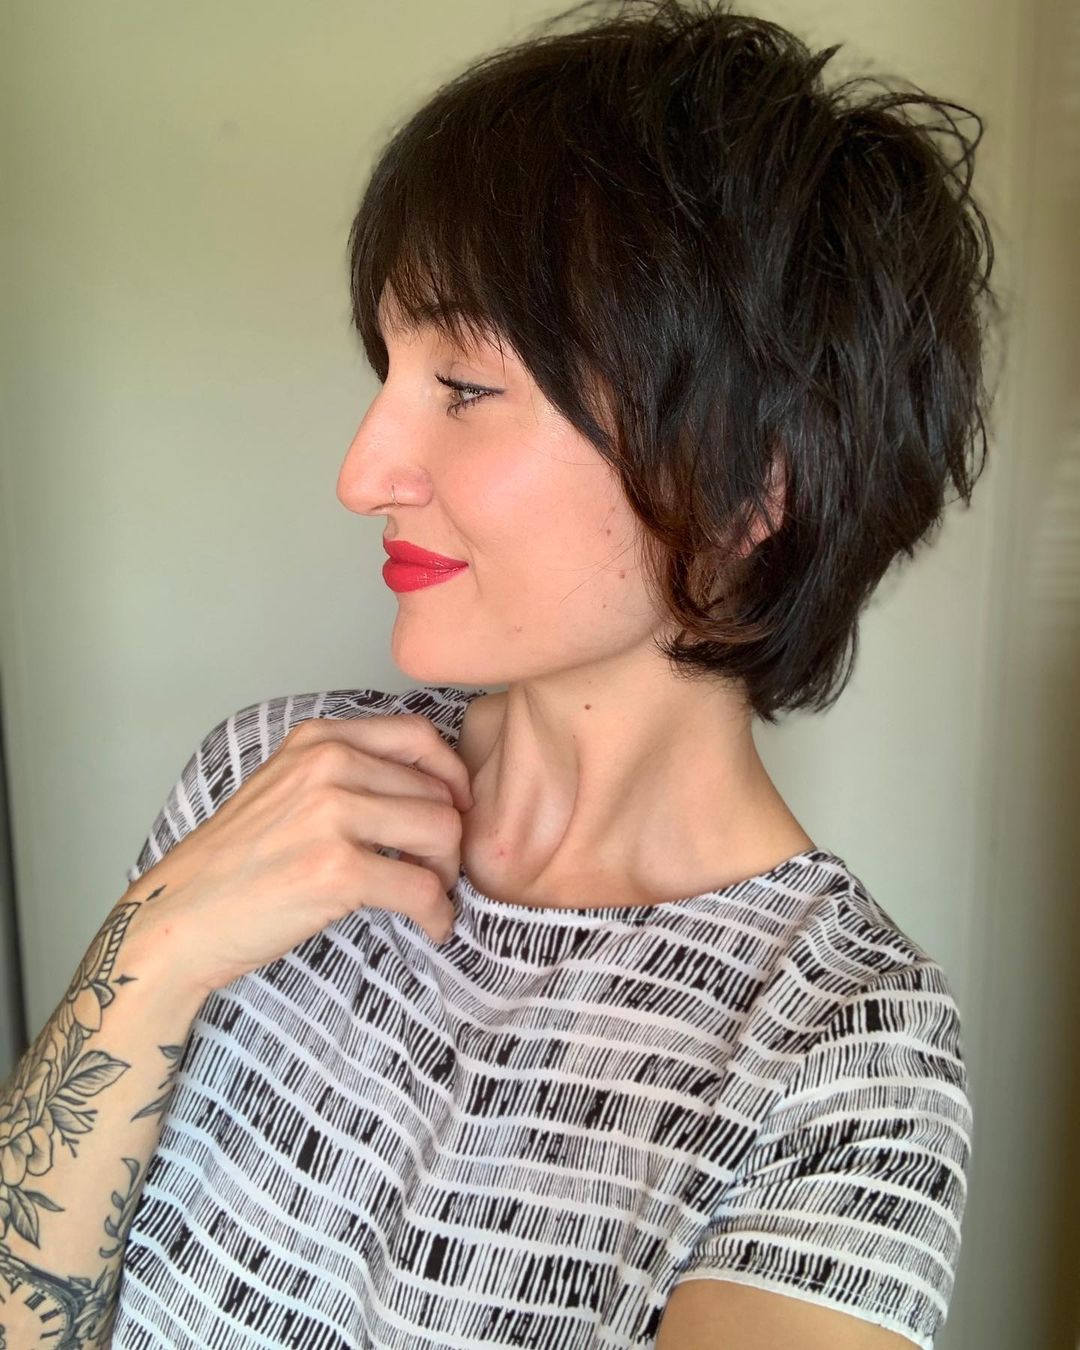 Short Shaggy Cut with Textured Bangs